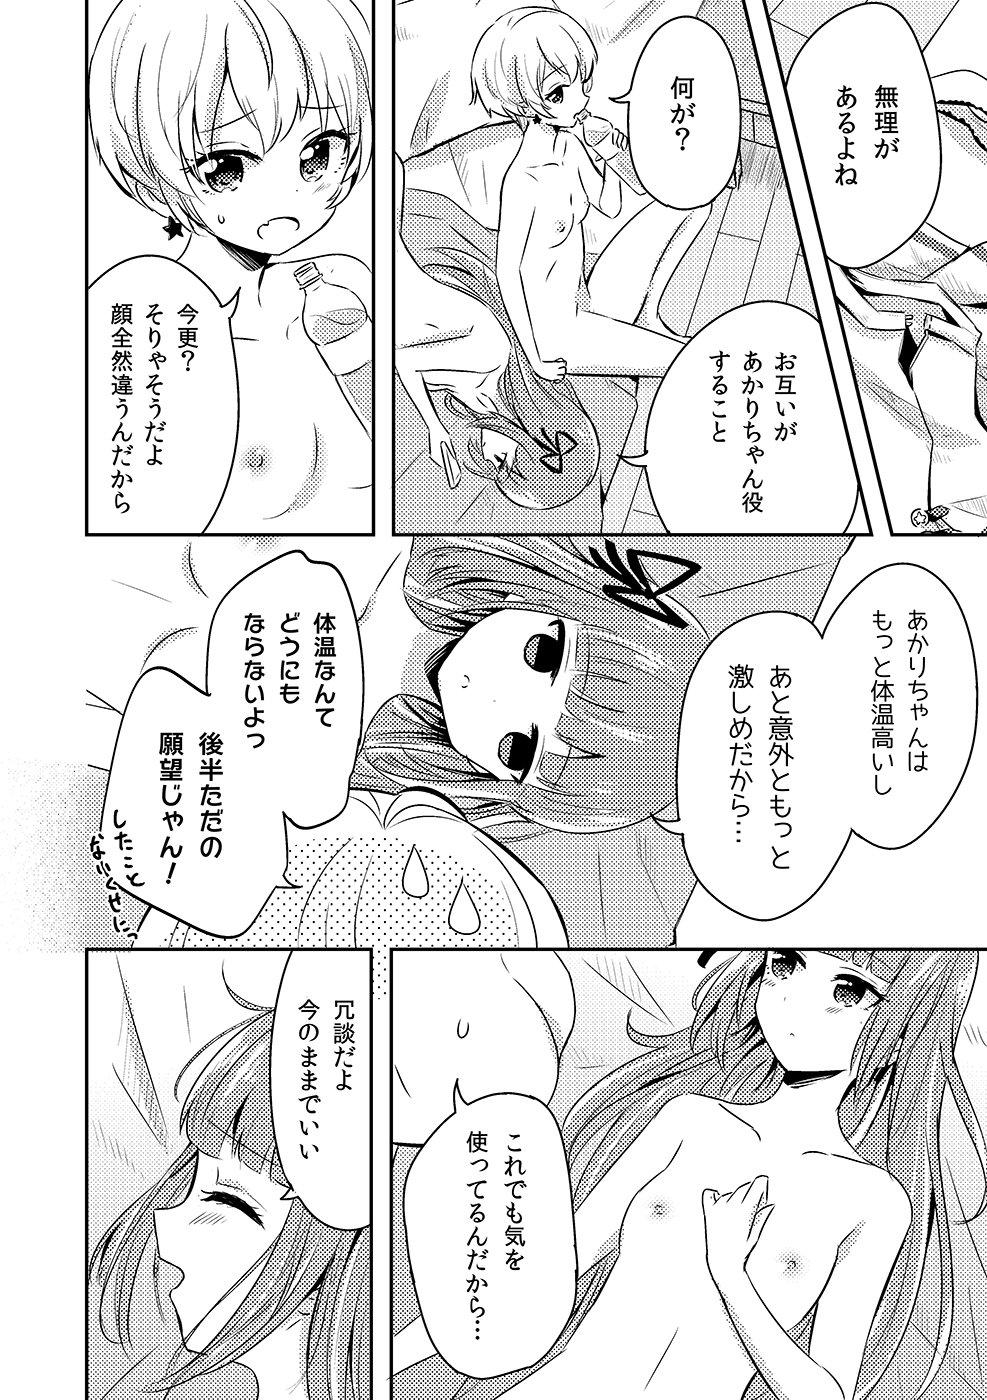 Gay Brokenboys Who contributed to loveless sex joint two years ago! Yuusumi manga. - Aikatsu Cumshots - Picture 2